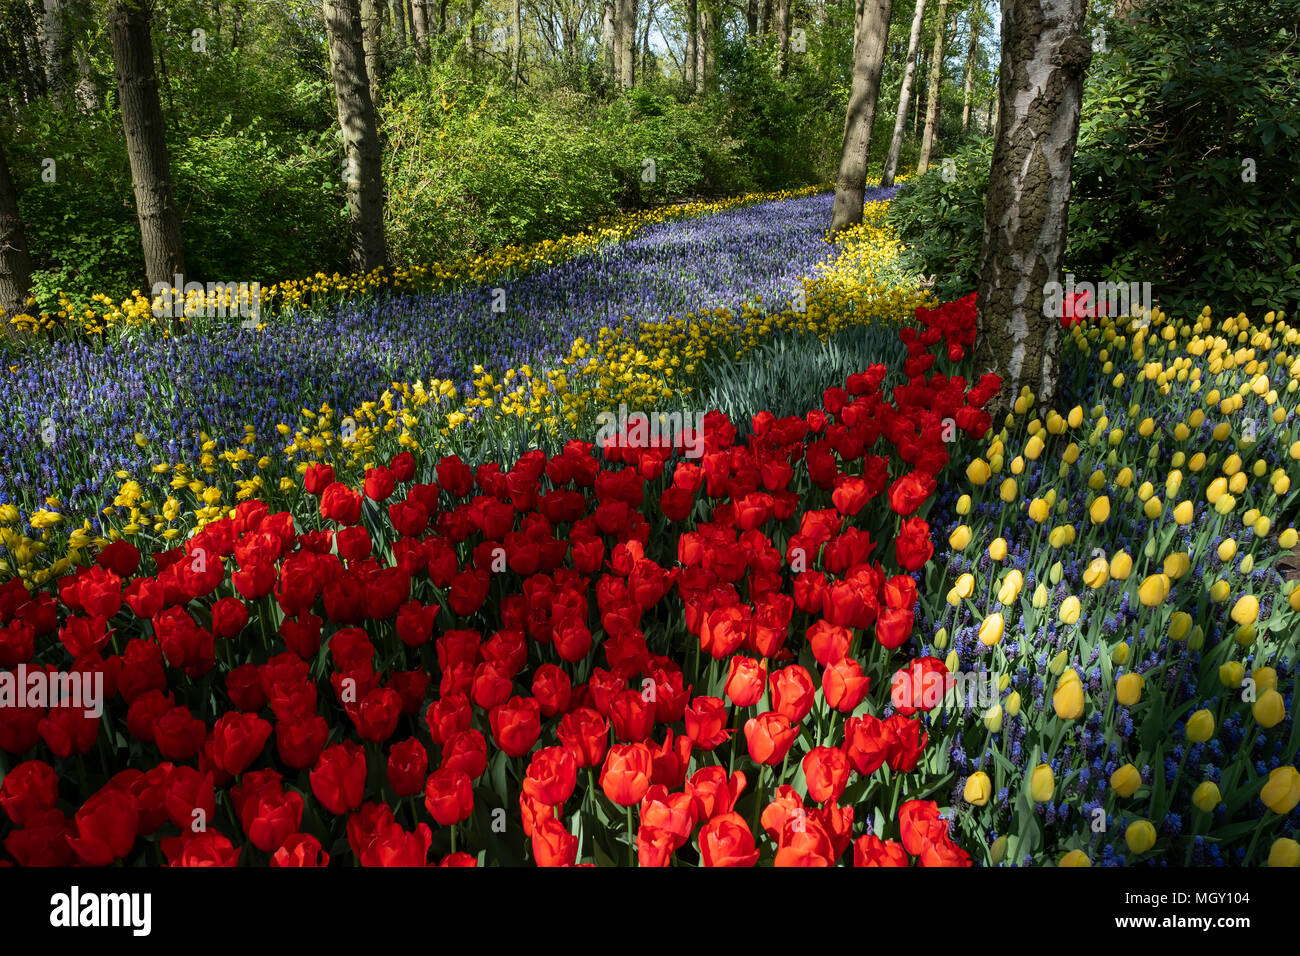 Floral spectacle in the largest garden in the world, the Keukenhof park. Stock Photo